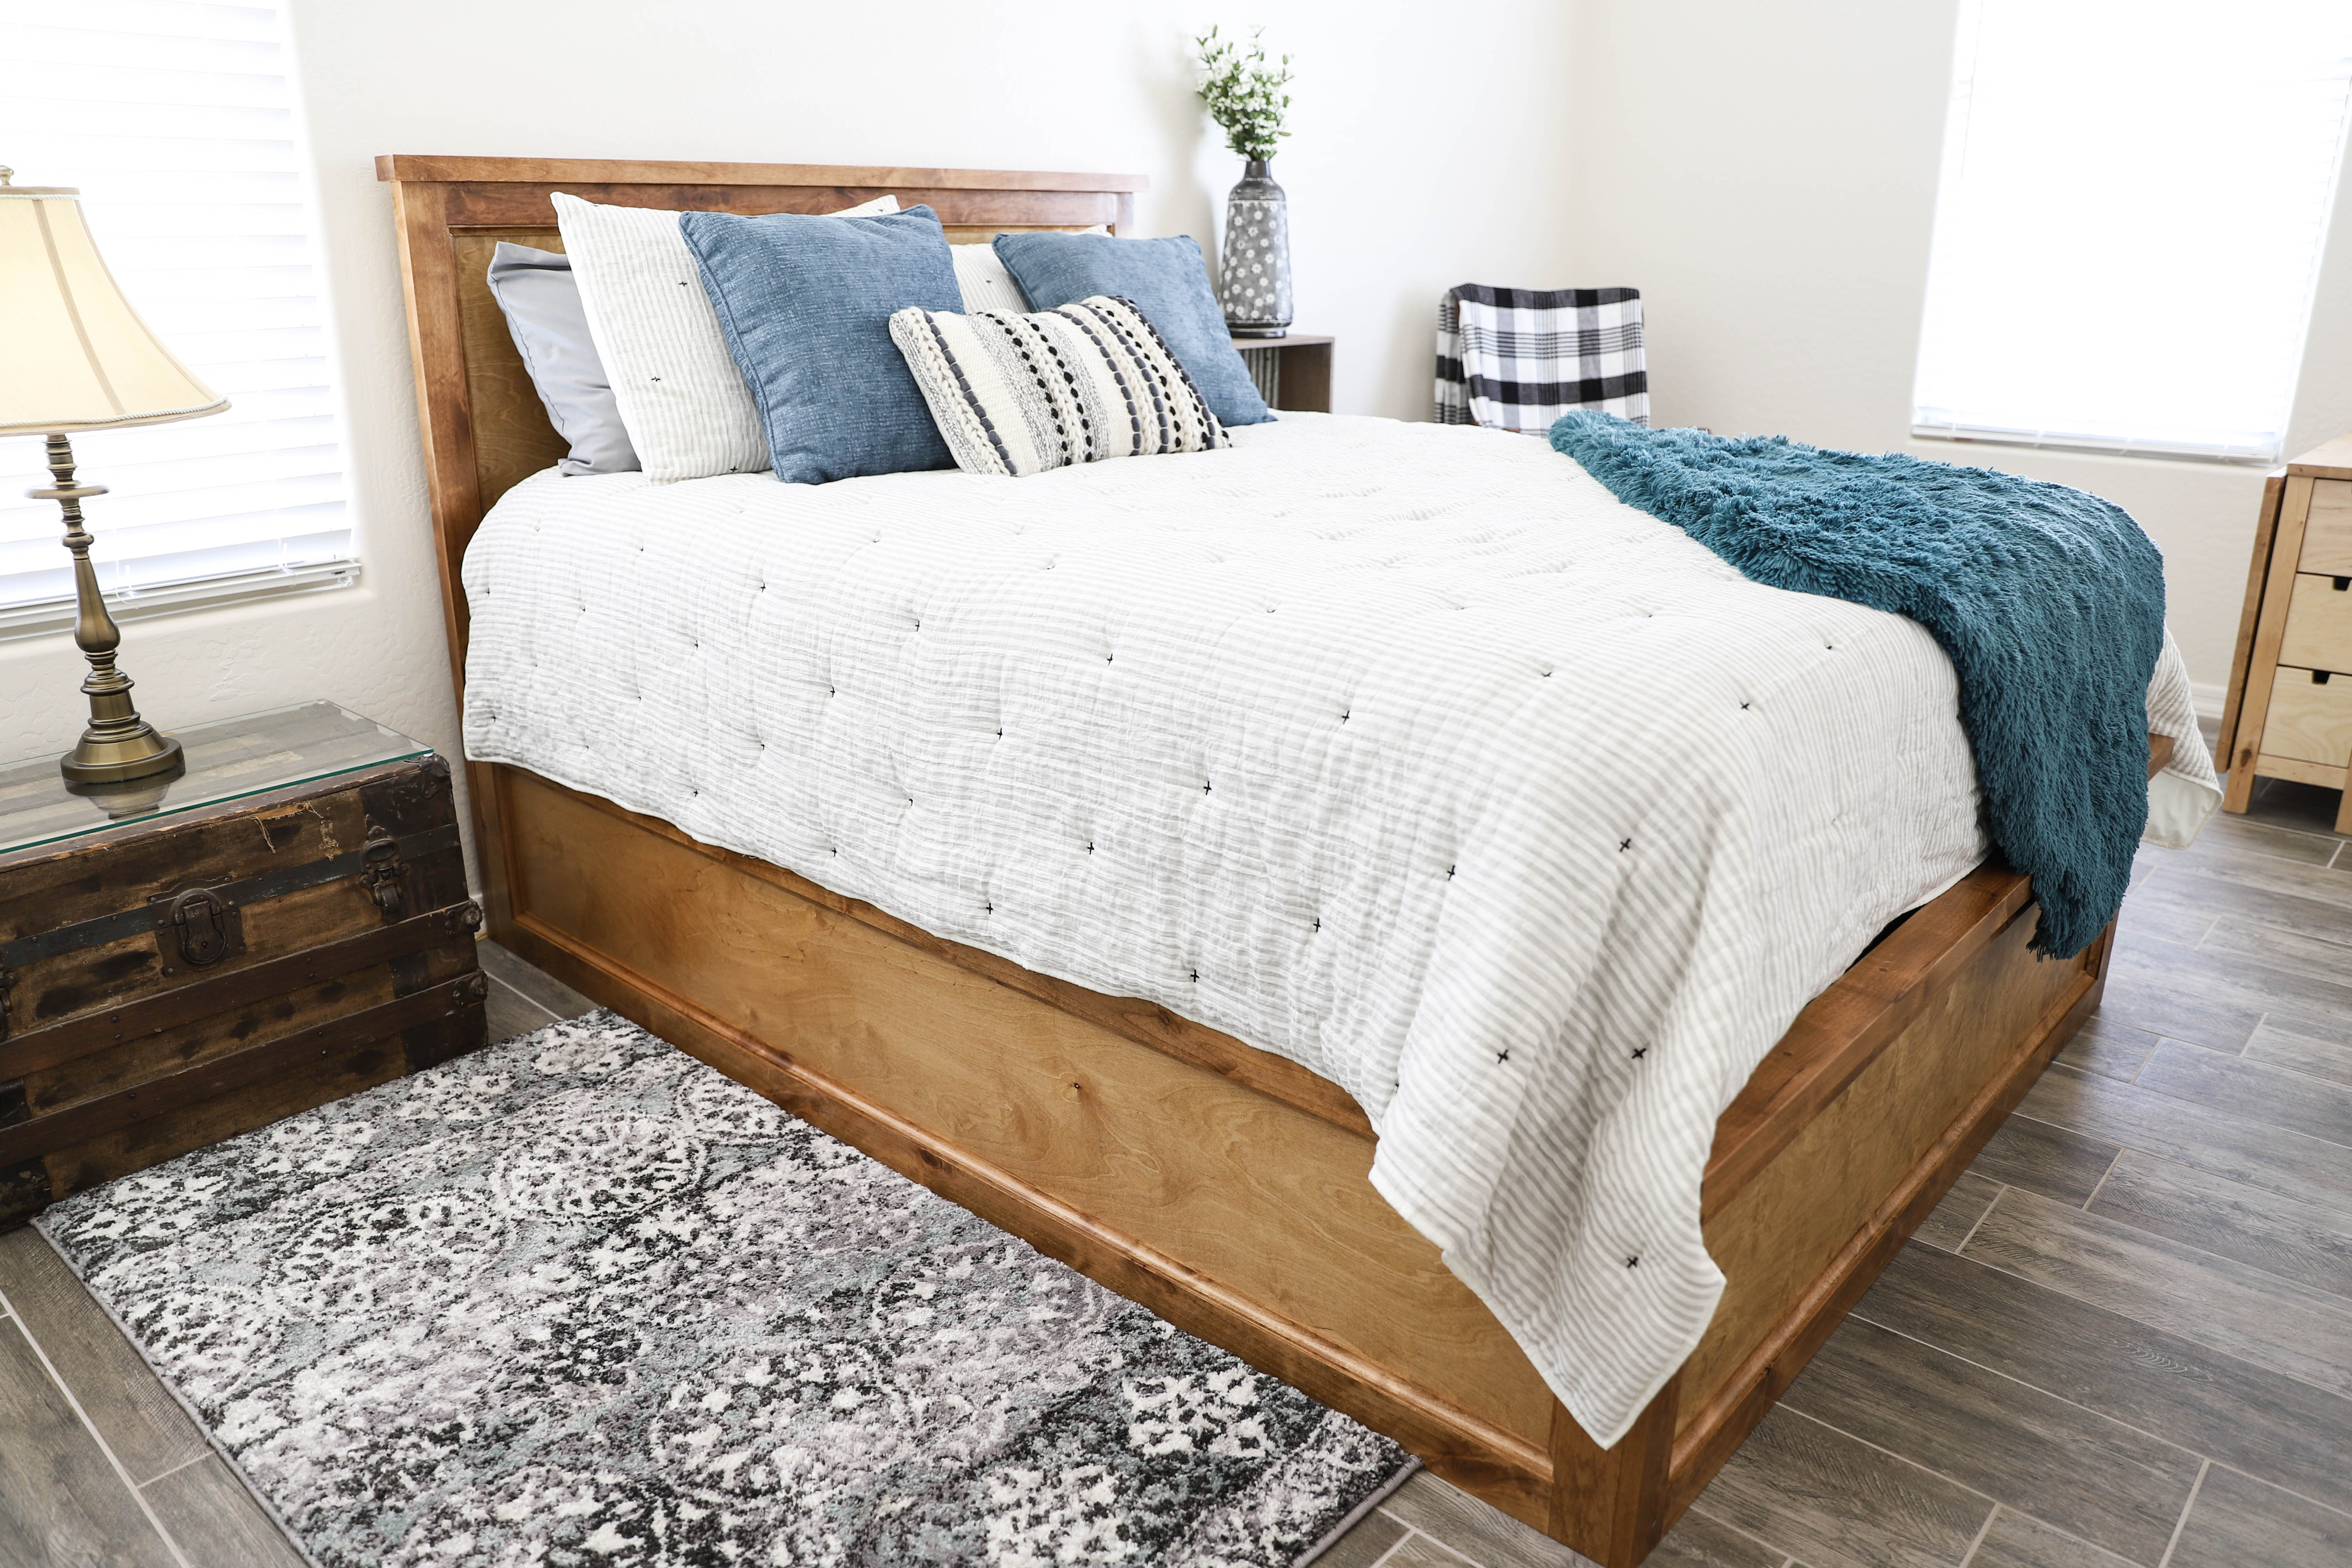 How To Build A Queen Size Storage Bed, Wood Bed Frame With Drawers Plans